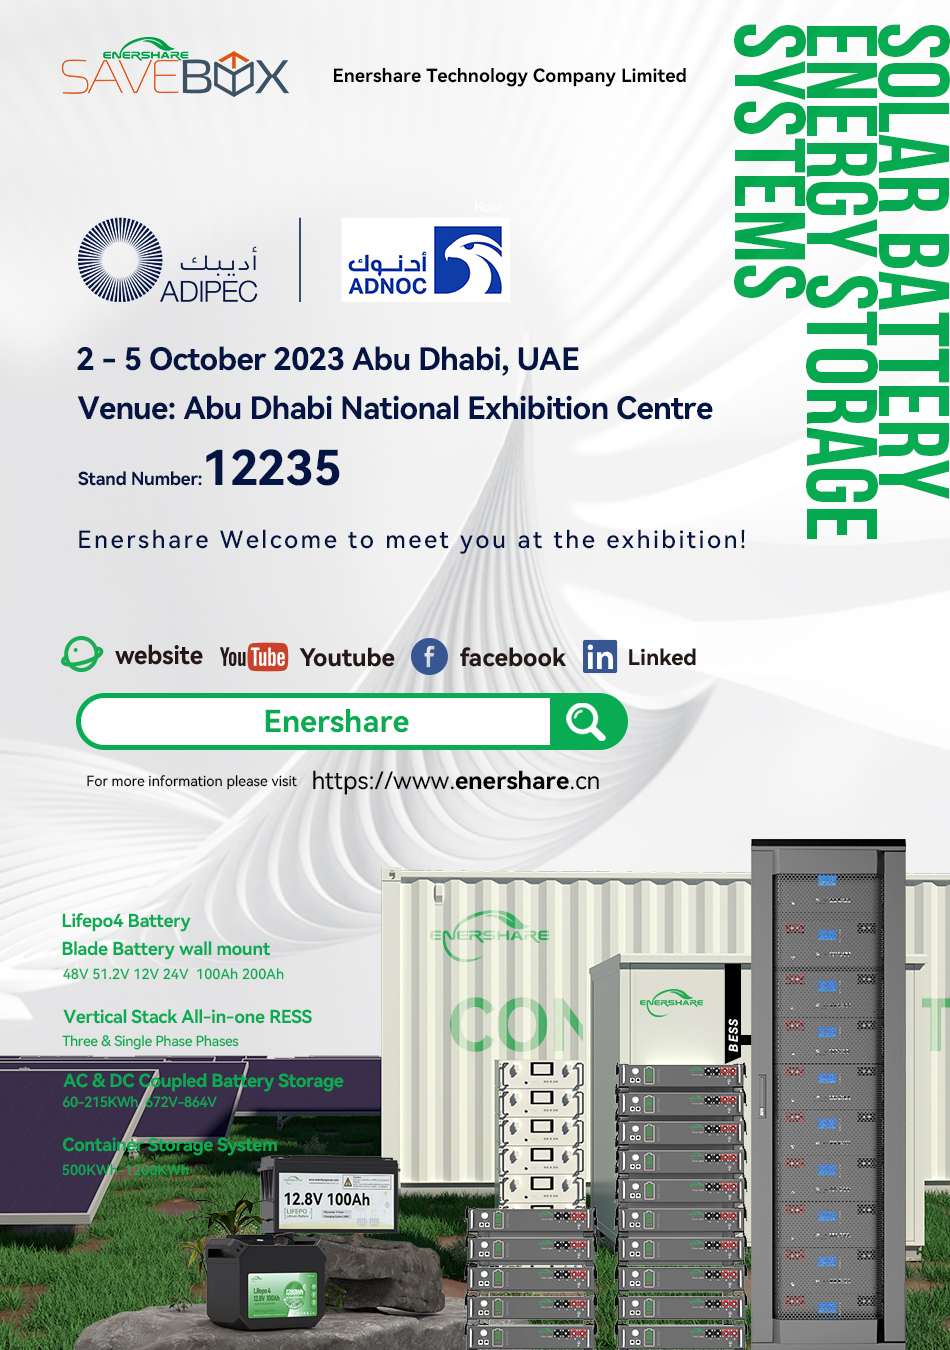 Enershare at ADIPEC 2023 on 2-5th October in Abu Dhabi, UAE.